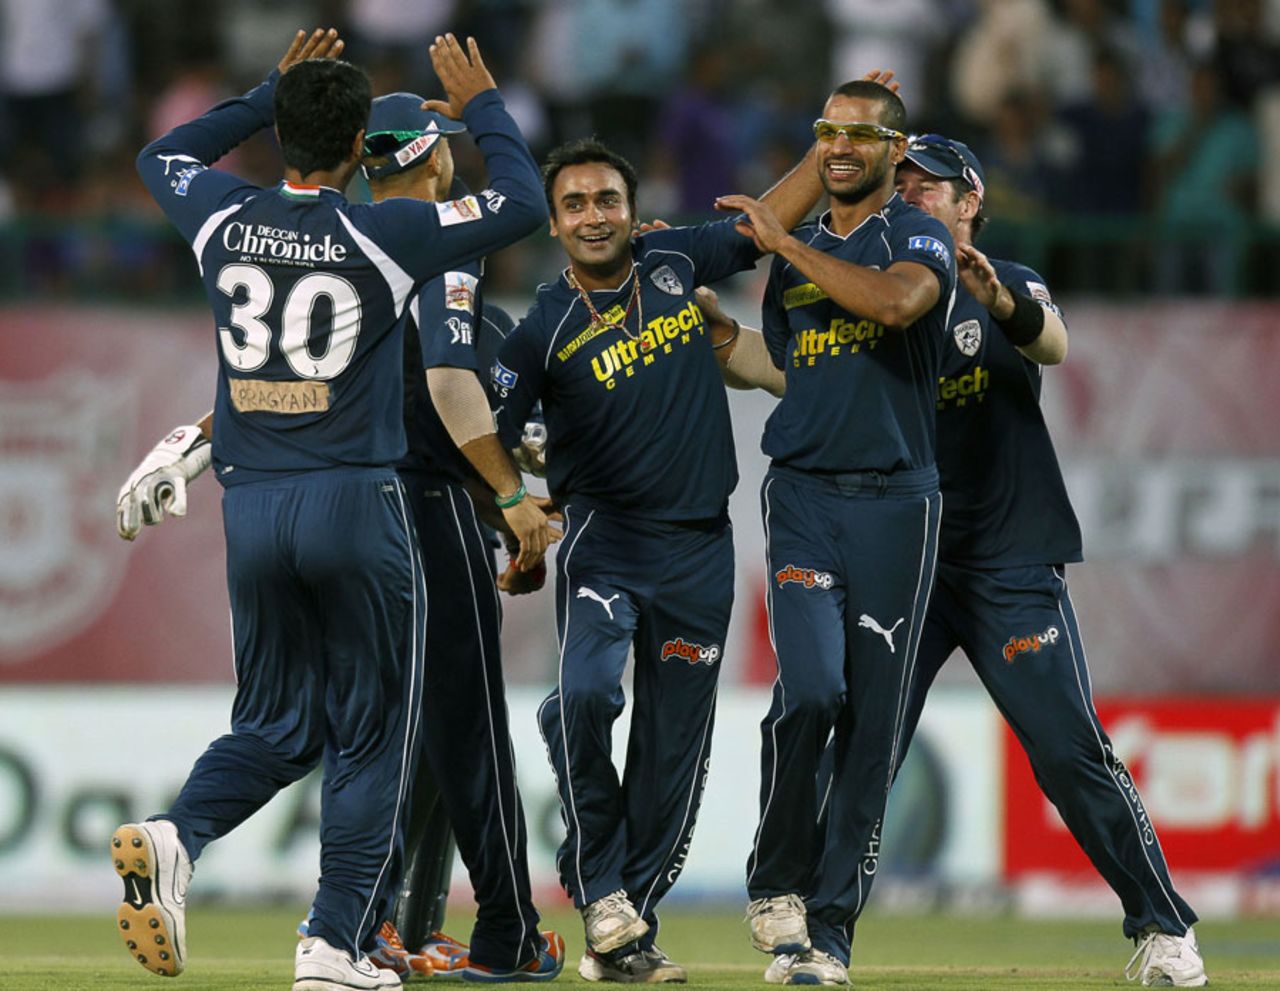 Amit Mishra completed his second IPL hat-trick, Kings XI Punjab v Deccan Chargers, IPL 2011, Dharamsala, May 21, 2011